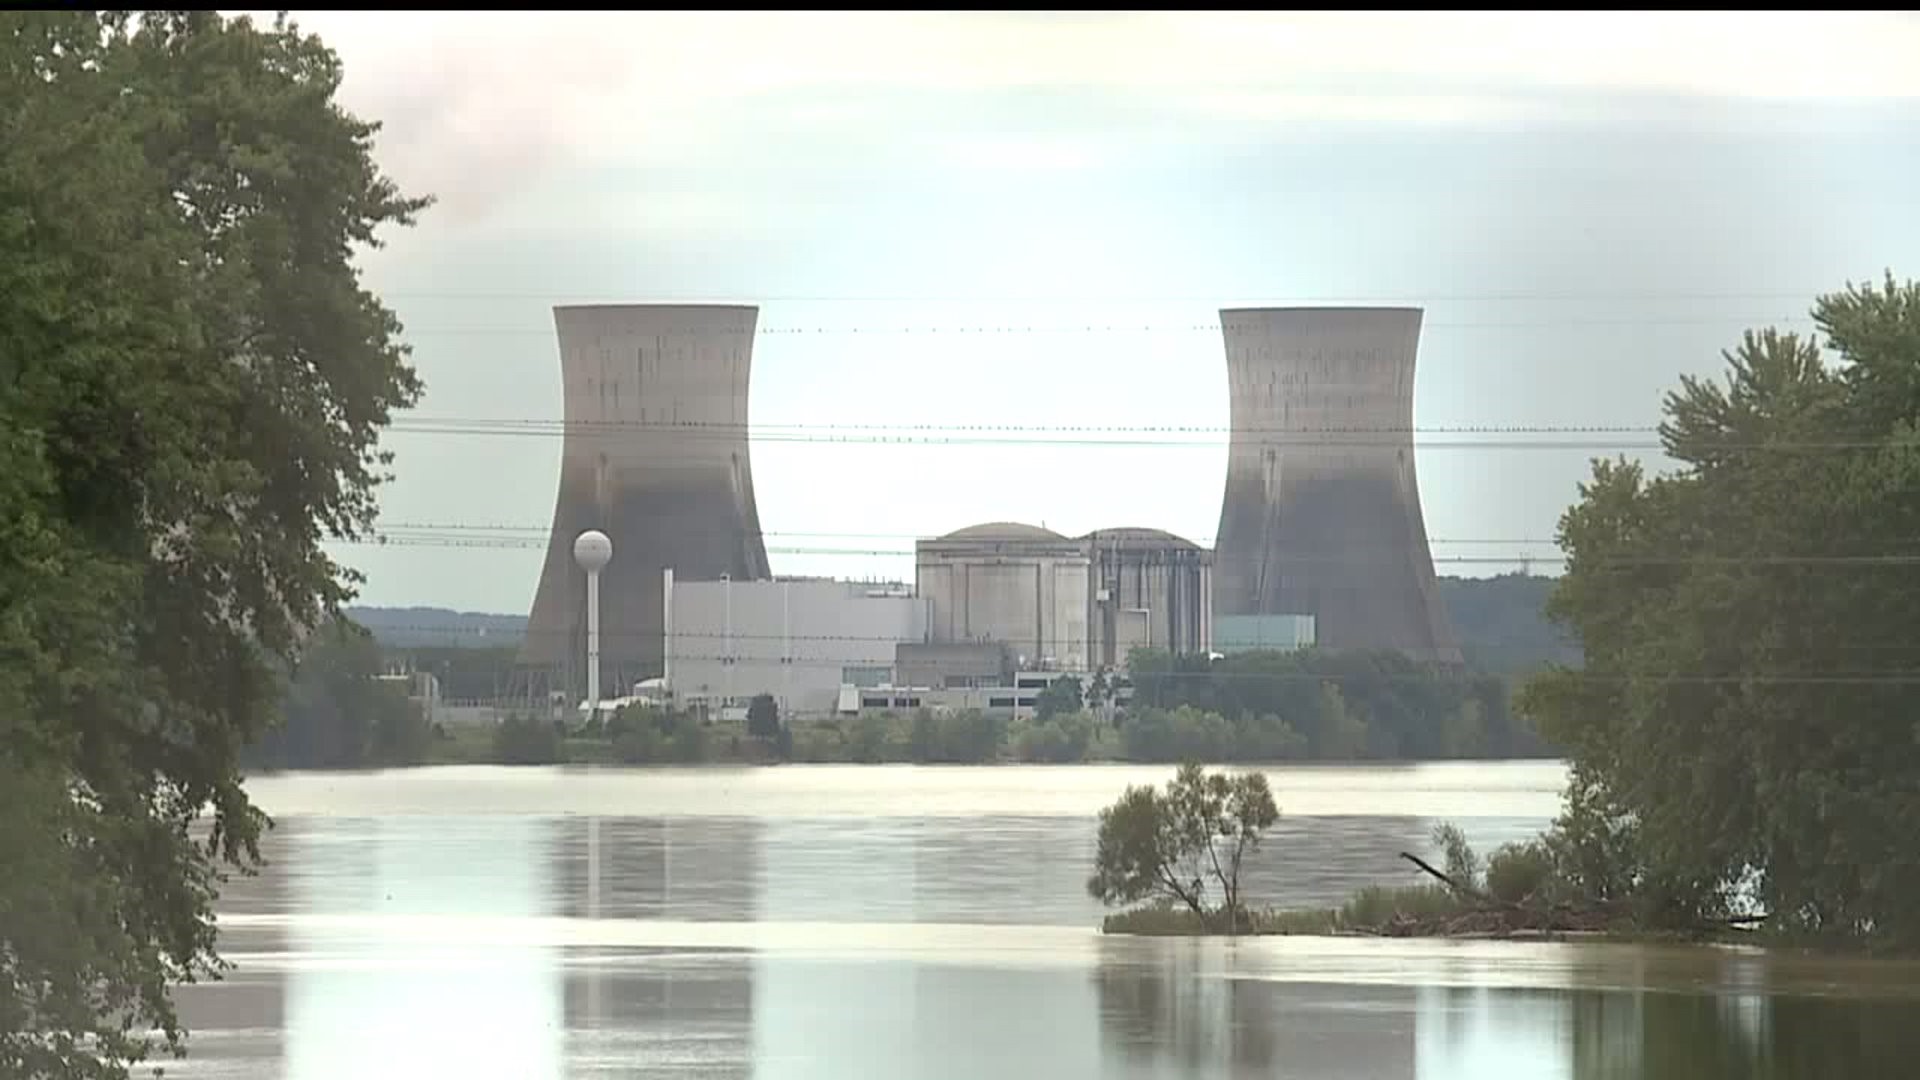 Nuclear Energy Report: Pennsylvanians to pay $285 million more for electricity if nuclear plants shutdown